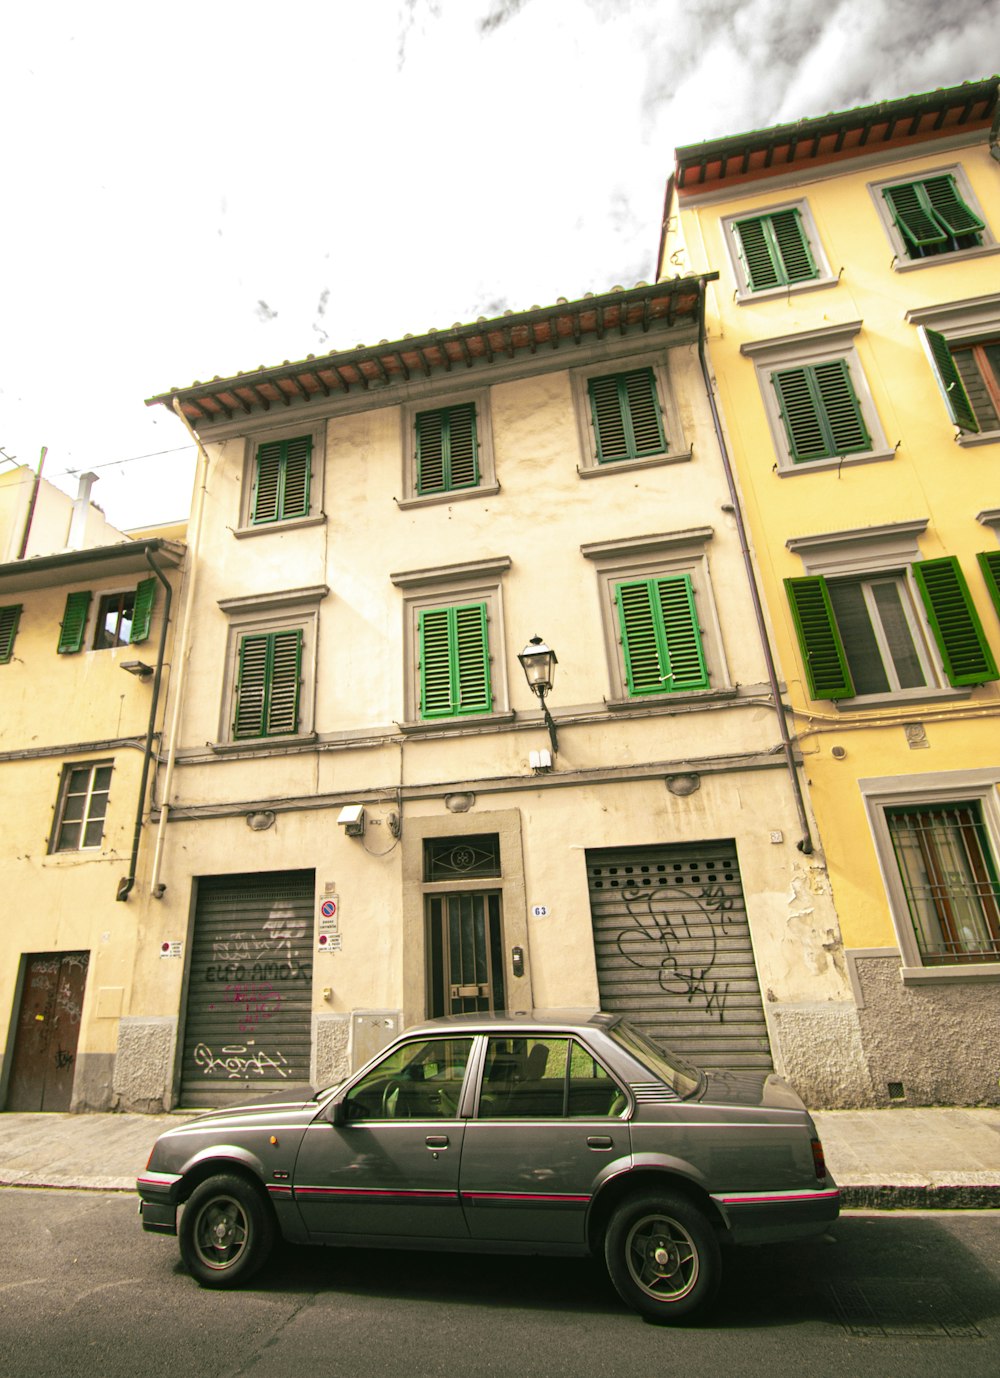 a car parked in front of a building with green shutters